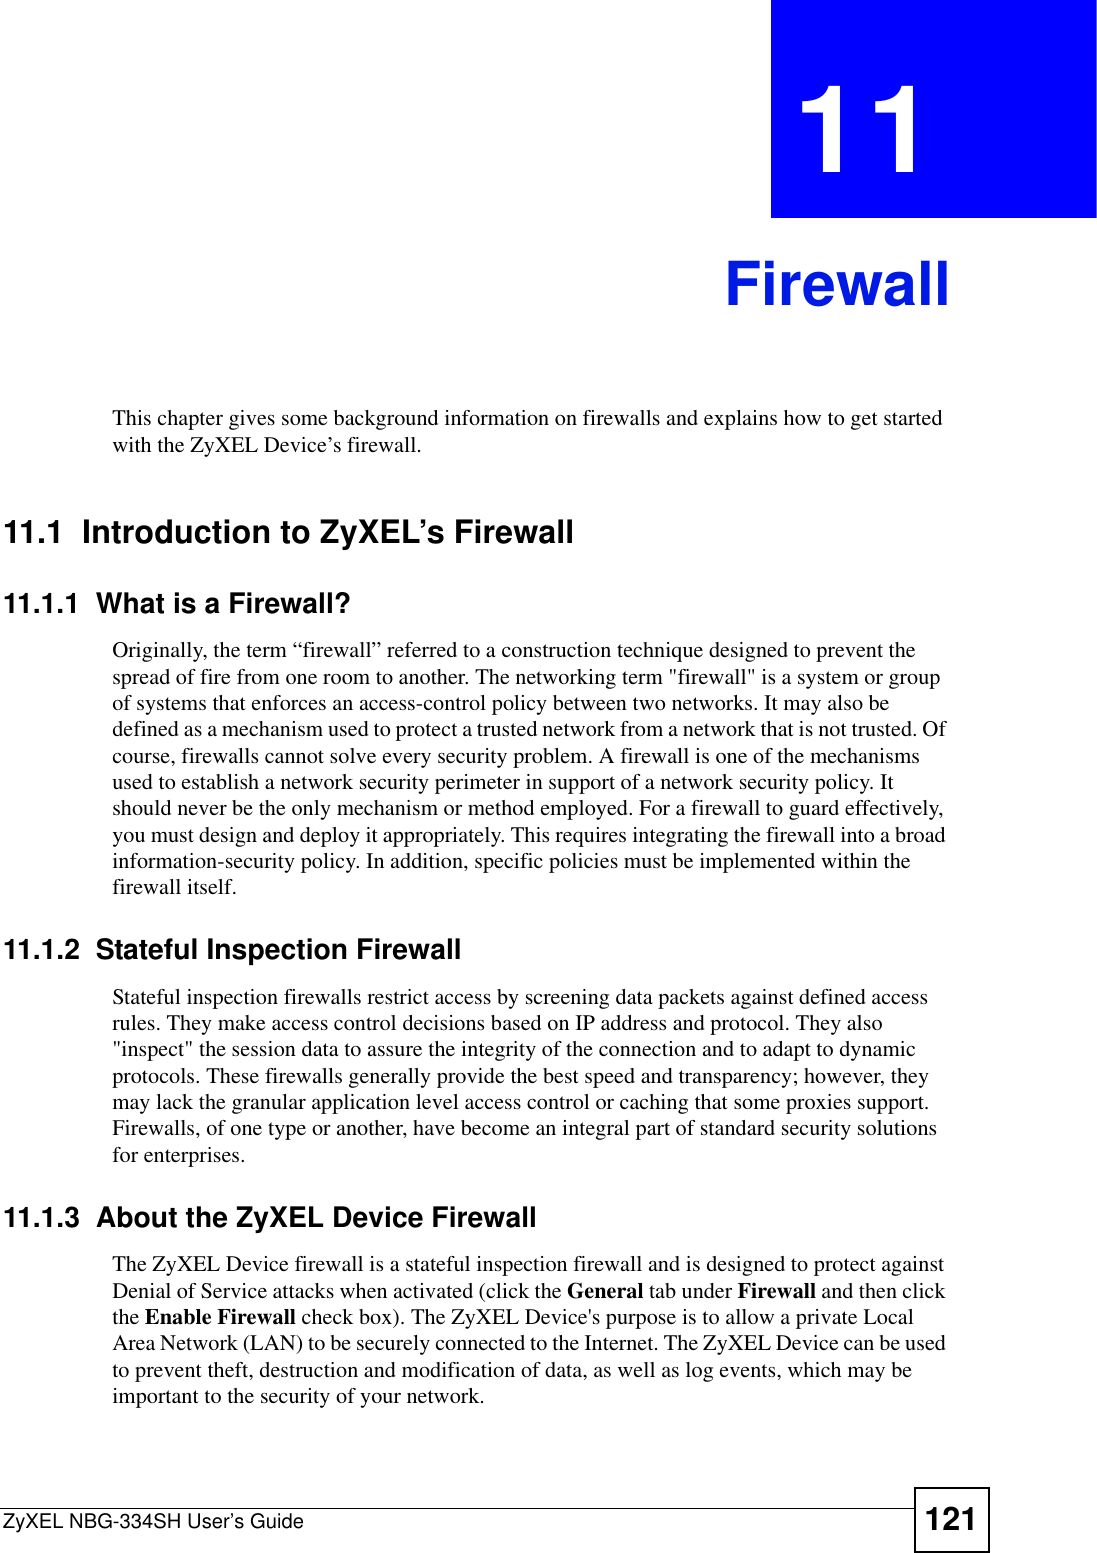 ZyXEL NBG-334SH User’s Guide 121CHAPTER 11 FirewallThis chapter gives some background information on firewalls and explains how to get started with the ZyXEL Device’s firewall.11.1  Introduction to ZyXEL’s Firewall   11.1.1  What is a Firewall?Originally, the term “firewall” referred to a construction technique designed to prevent the spread of fire from one room to another. The networking term &quot;firewall&quot; is a system or group of systems that enforces an access-control policy between two networks. It may also be defined as a mechanism used to protect a trusted network from a network that is not trusted. Of course, firewalls cannot solve every security problem. A firewall is one of the mechanisms used to establish a network security perimeter in support of a network security policy. It should never be the only mechanism or method employed. For a firewall to guard effectively, you must design and deploy it appropriately. This requires integrating the firewall into a broad information-security policy. In addition, specific policies must be implemented within the firewall itself. 11.1.2  Stateful Inspection Firewall Stateful inspection firewalls restrict access by screening data packets against defined access rules. They make access control decisions based on IP address and protocol. They also &quot;inspect&quot; the session data to assure the integrity of the connection and to adapt to dynamic protocols. These firewalls generally provide the best speed and transparency; however, they may lack the granular application level access control or caching that some proxies support. Firewalls, of one type or another, have become an integral part of standard security solutions for enterprises.11.1.3  About the ZyXEL Device FirewallThe ZyXEL Device firewall is a stateful inspection firewall and is designed to protect against Denial of Service attacks when activated (click the General tab under Firewall and then click the Enable Firewall check box). The ZyXEL Device&apos;s purpose is to allow a private Local Area Network (LAN) to be securely connected to the Internet. The ZyXEL Device can be used to prevent theft, destruction and modification of data, as well as log events, which may be important to the security of your network. 